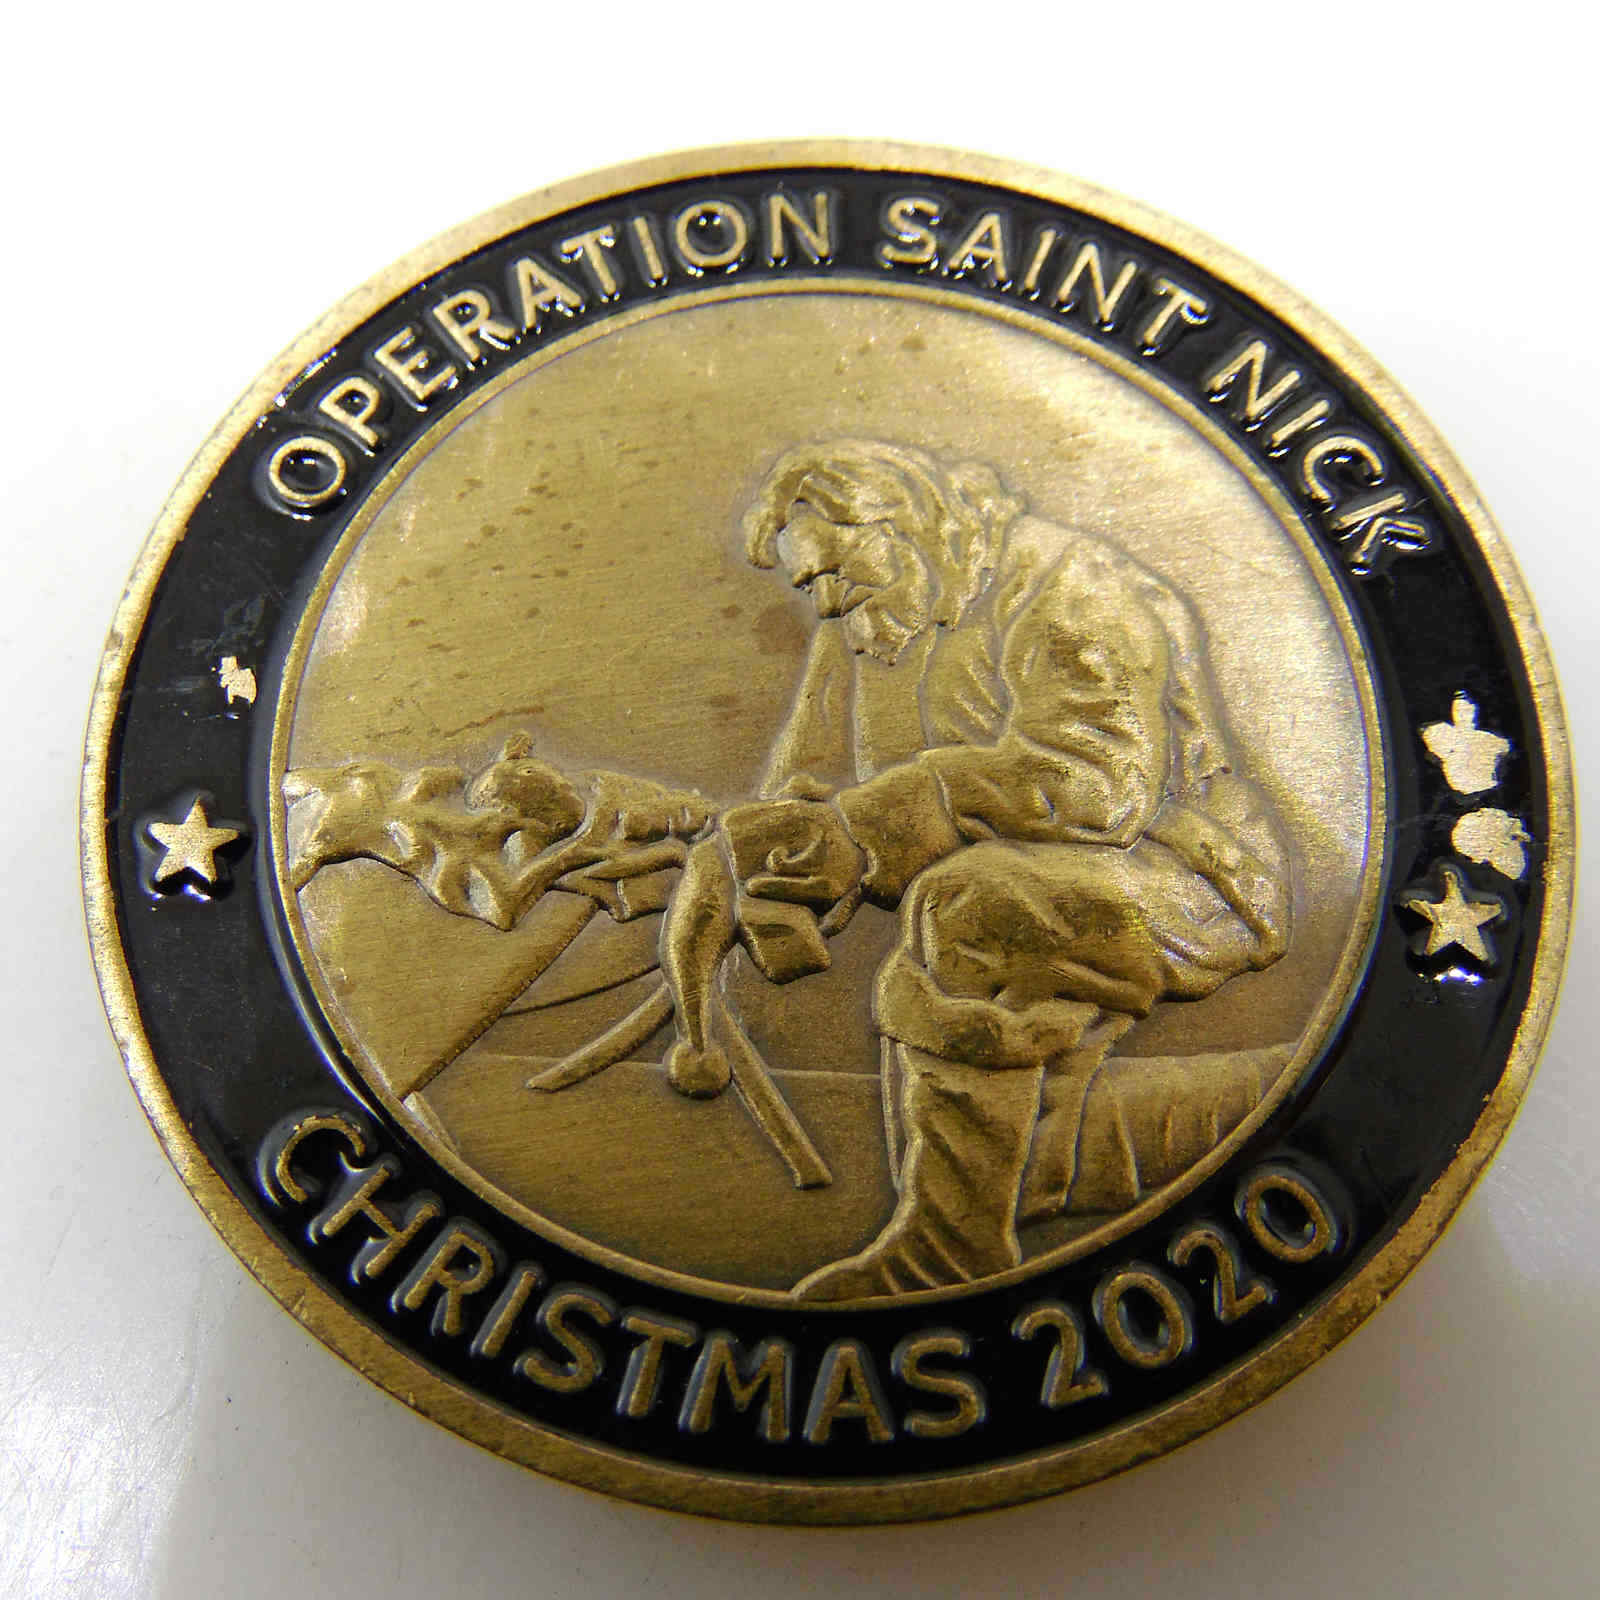 OPERATION SAINT NICK CHRISTMAS 2020 OPERATION ONE VOICE CHALLENGE COIN